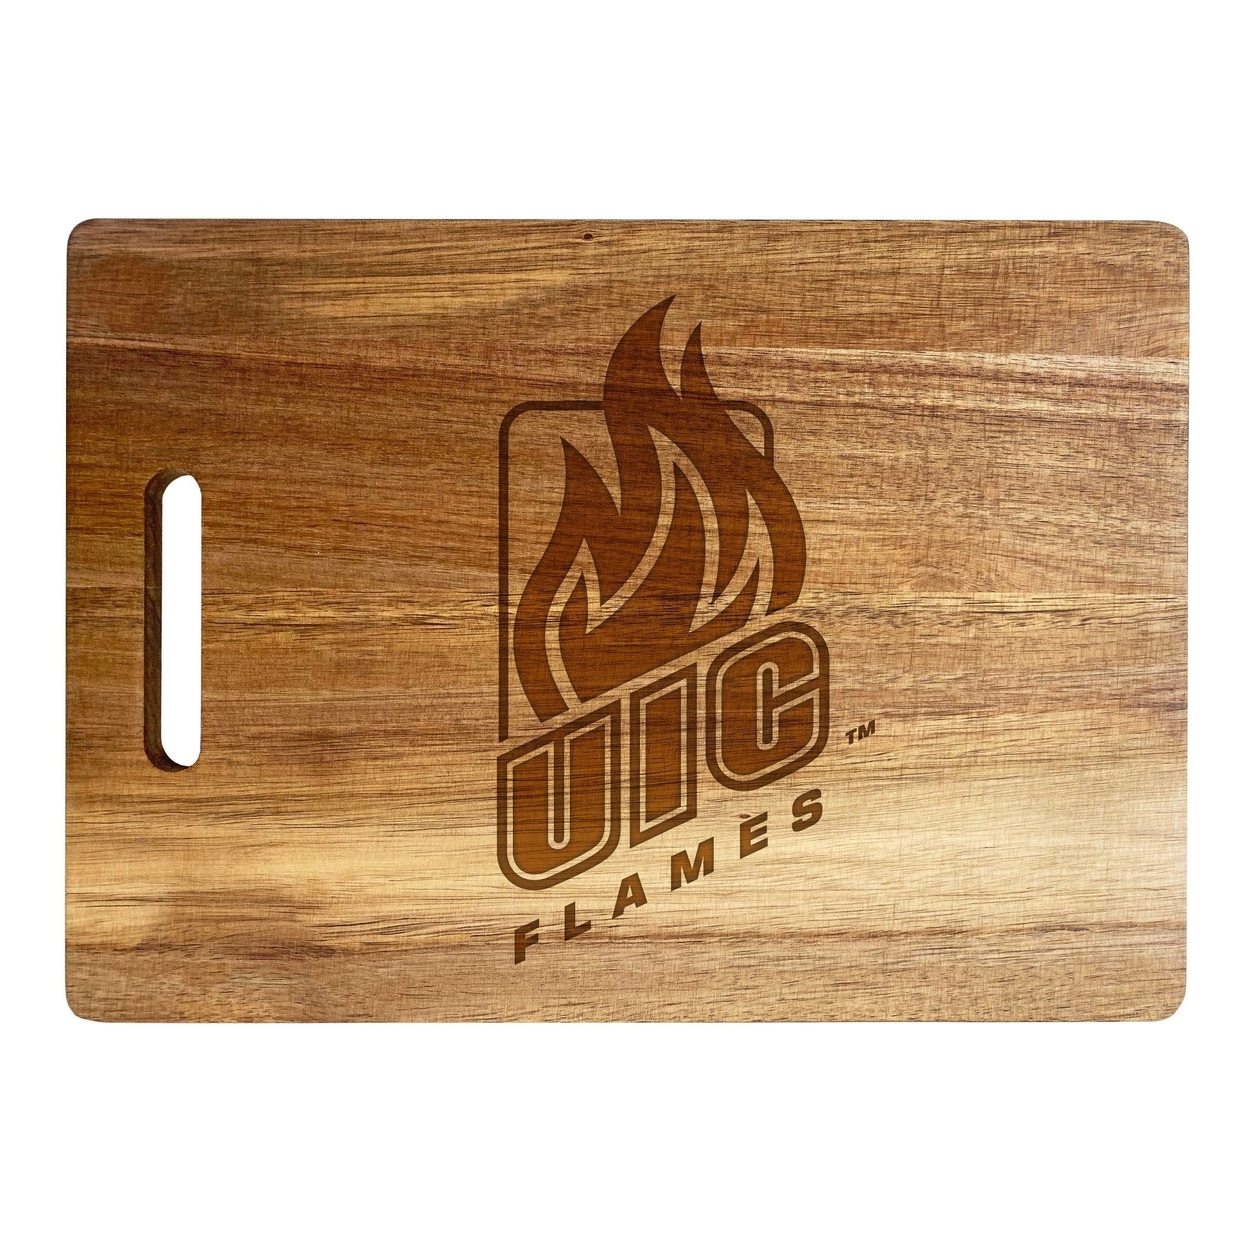 University Of Illinois At Chicago Engraved Wooden Cutting Board 10 X 14 Acacia Wood - Large Engraving